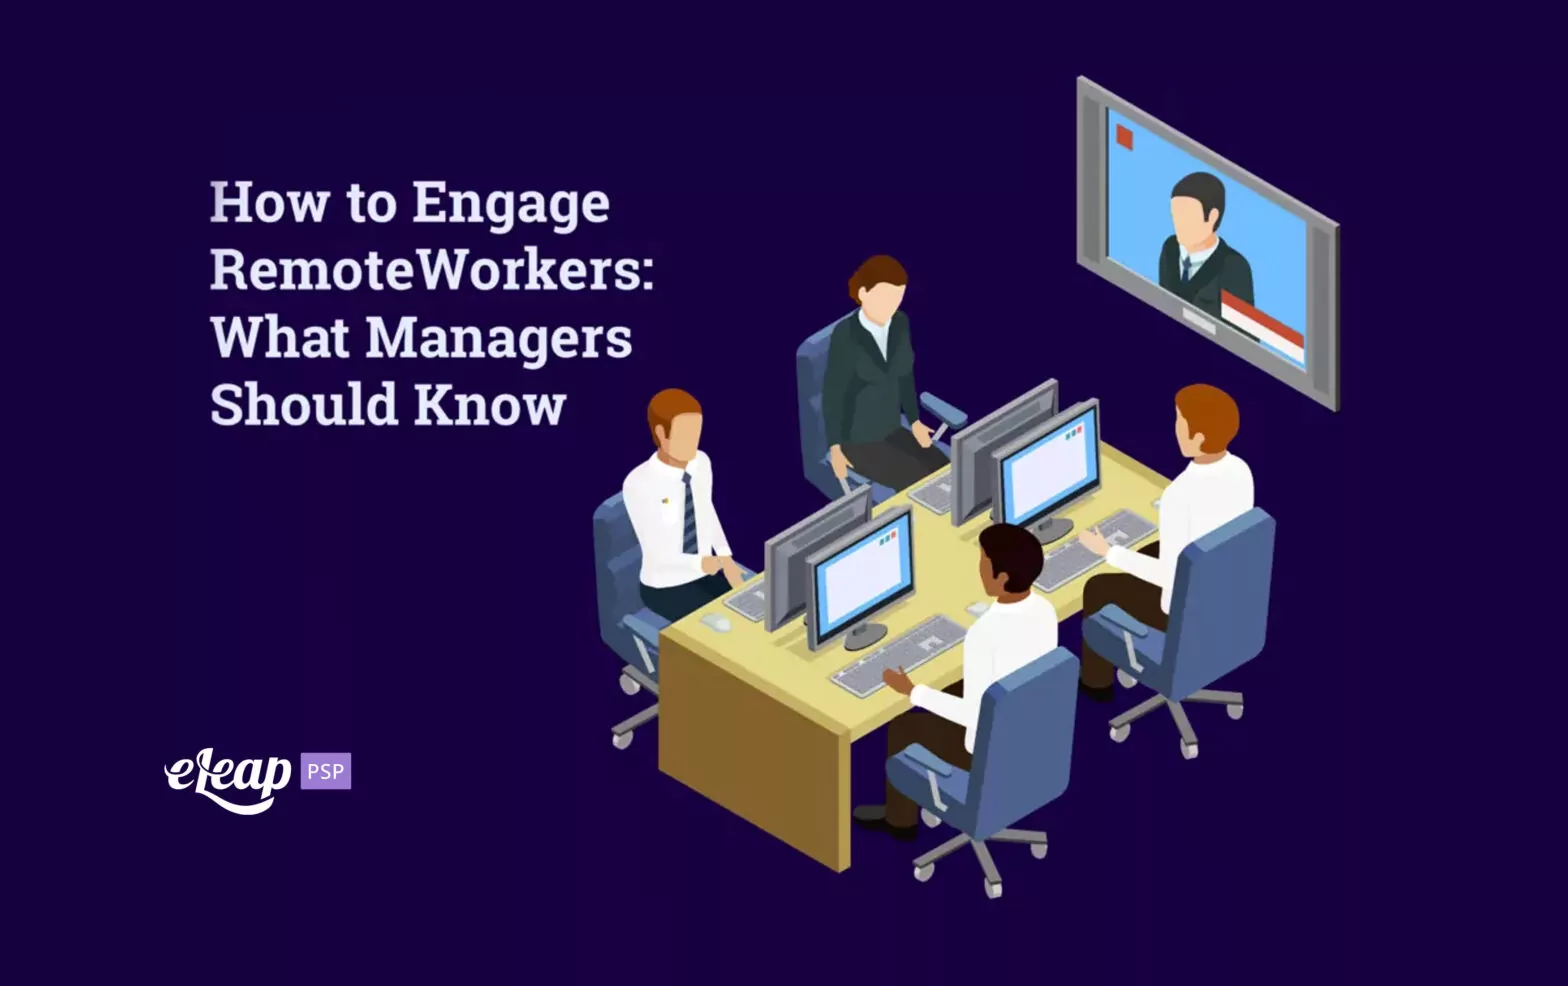 How to Engage Remote Workers: What Managers Should Know